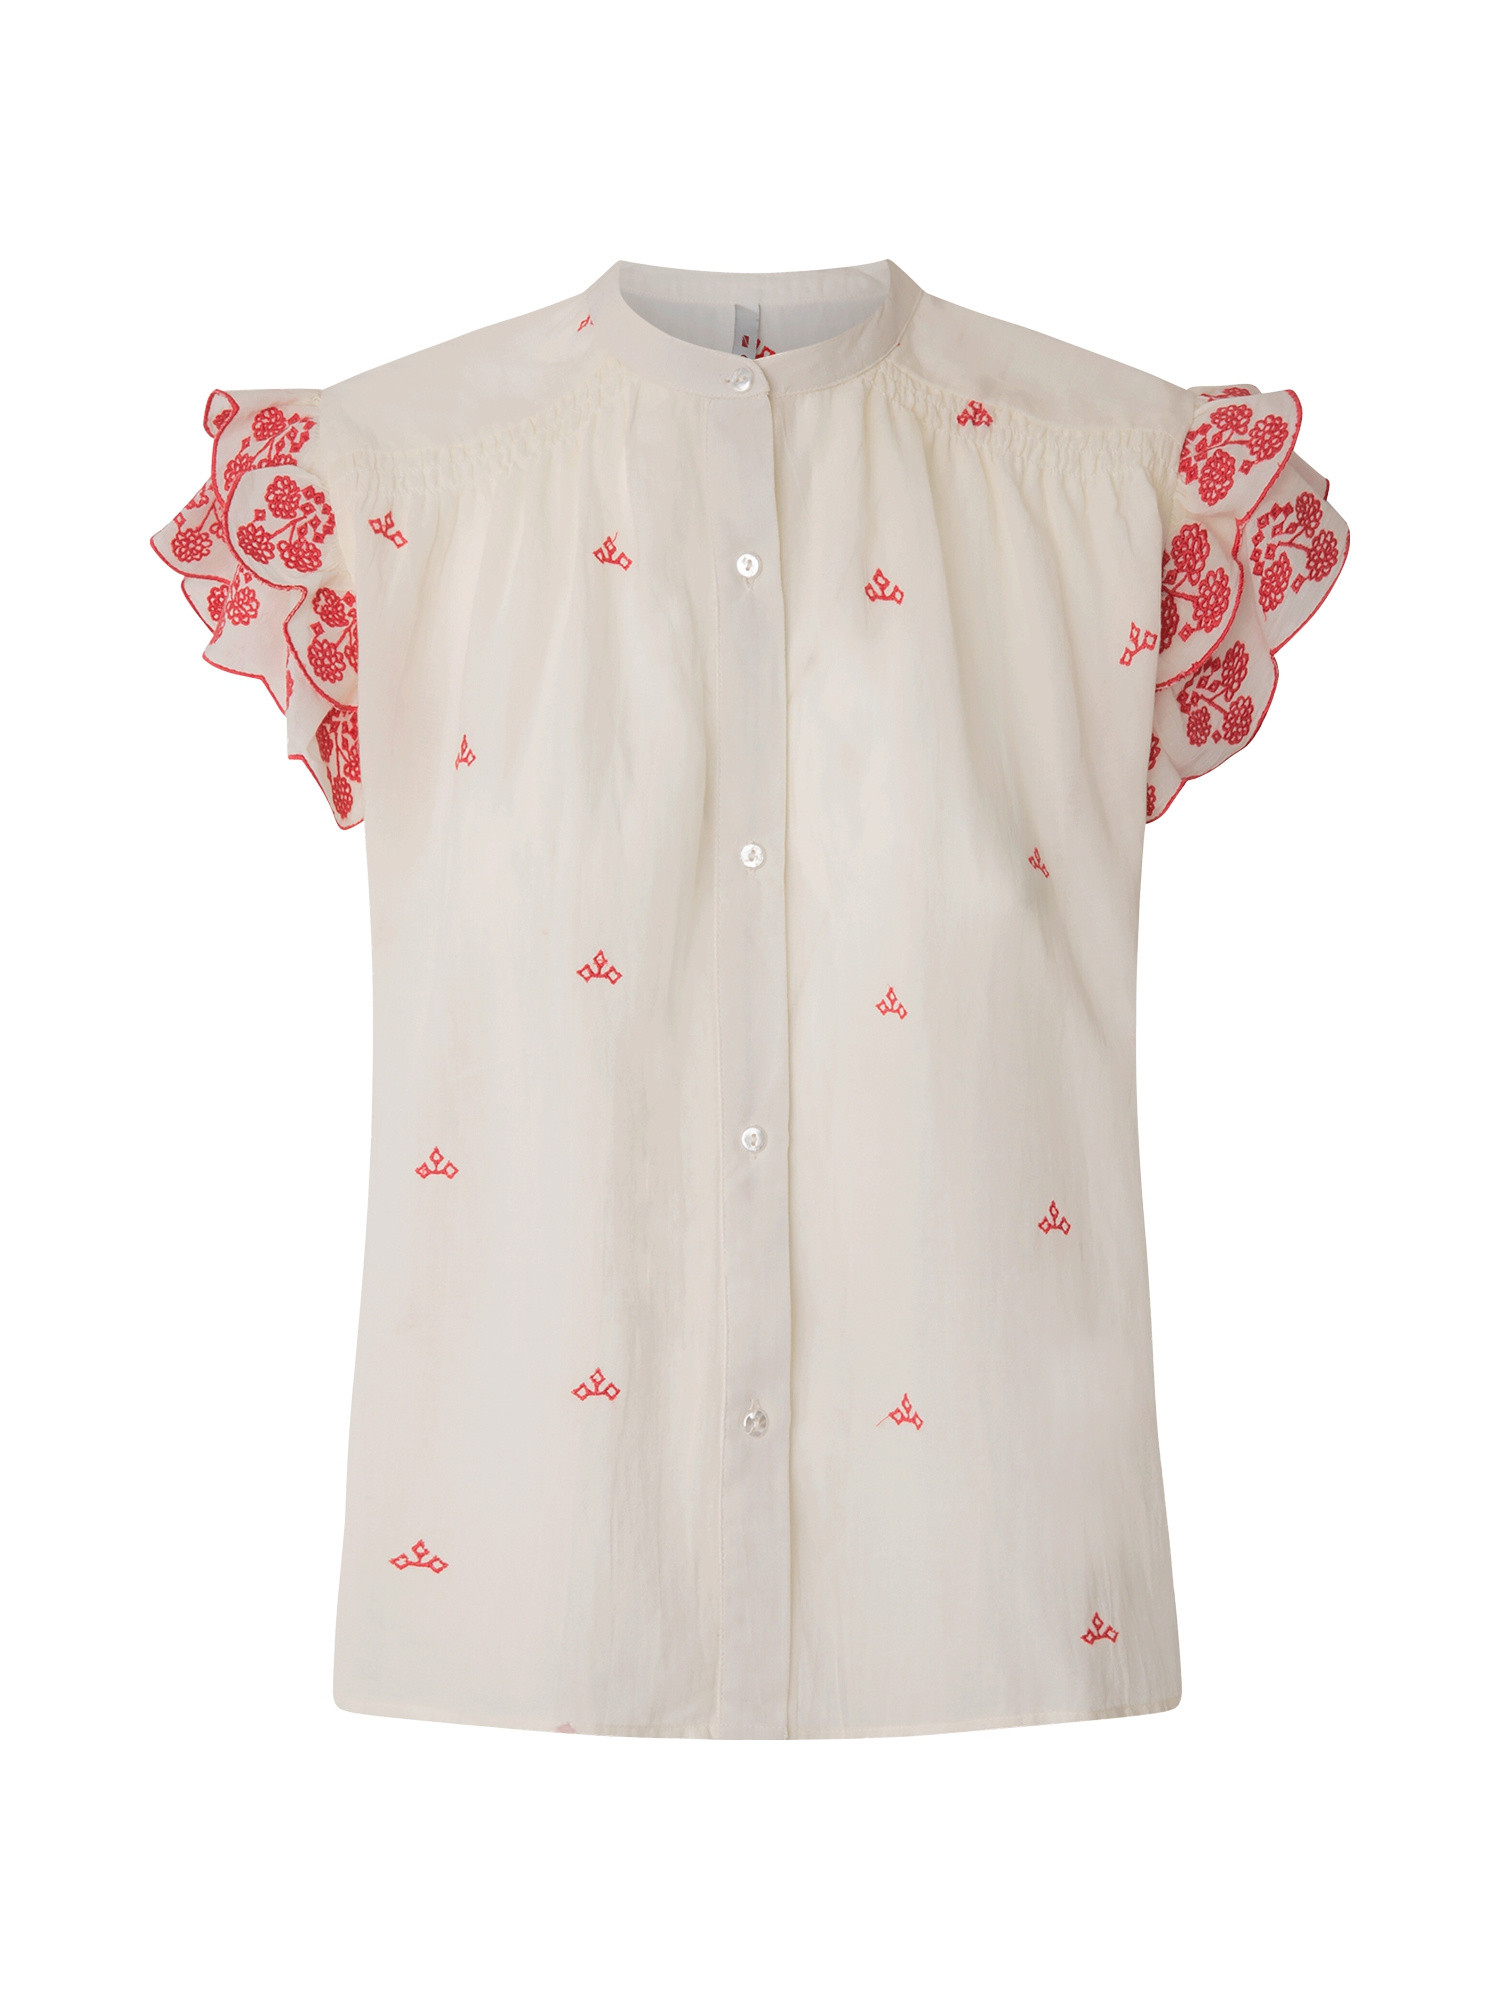 Pepe Jeans - Patterned shirt, White, large image number 0